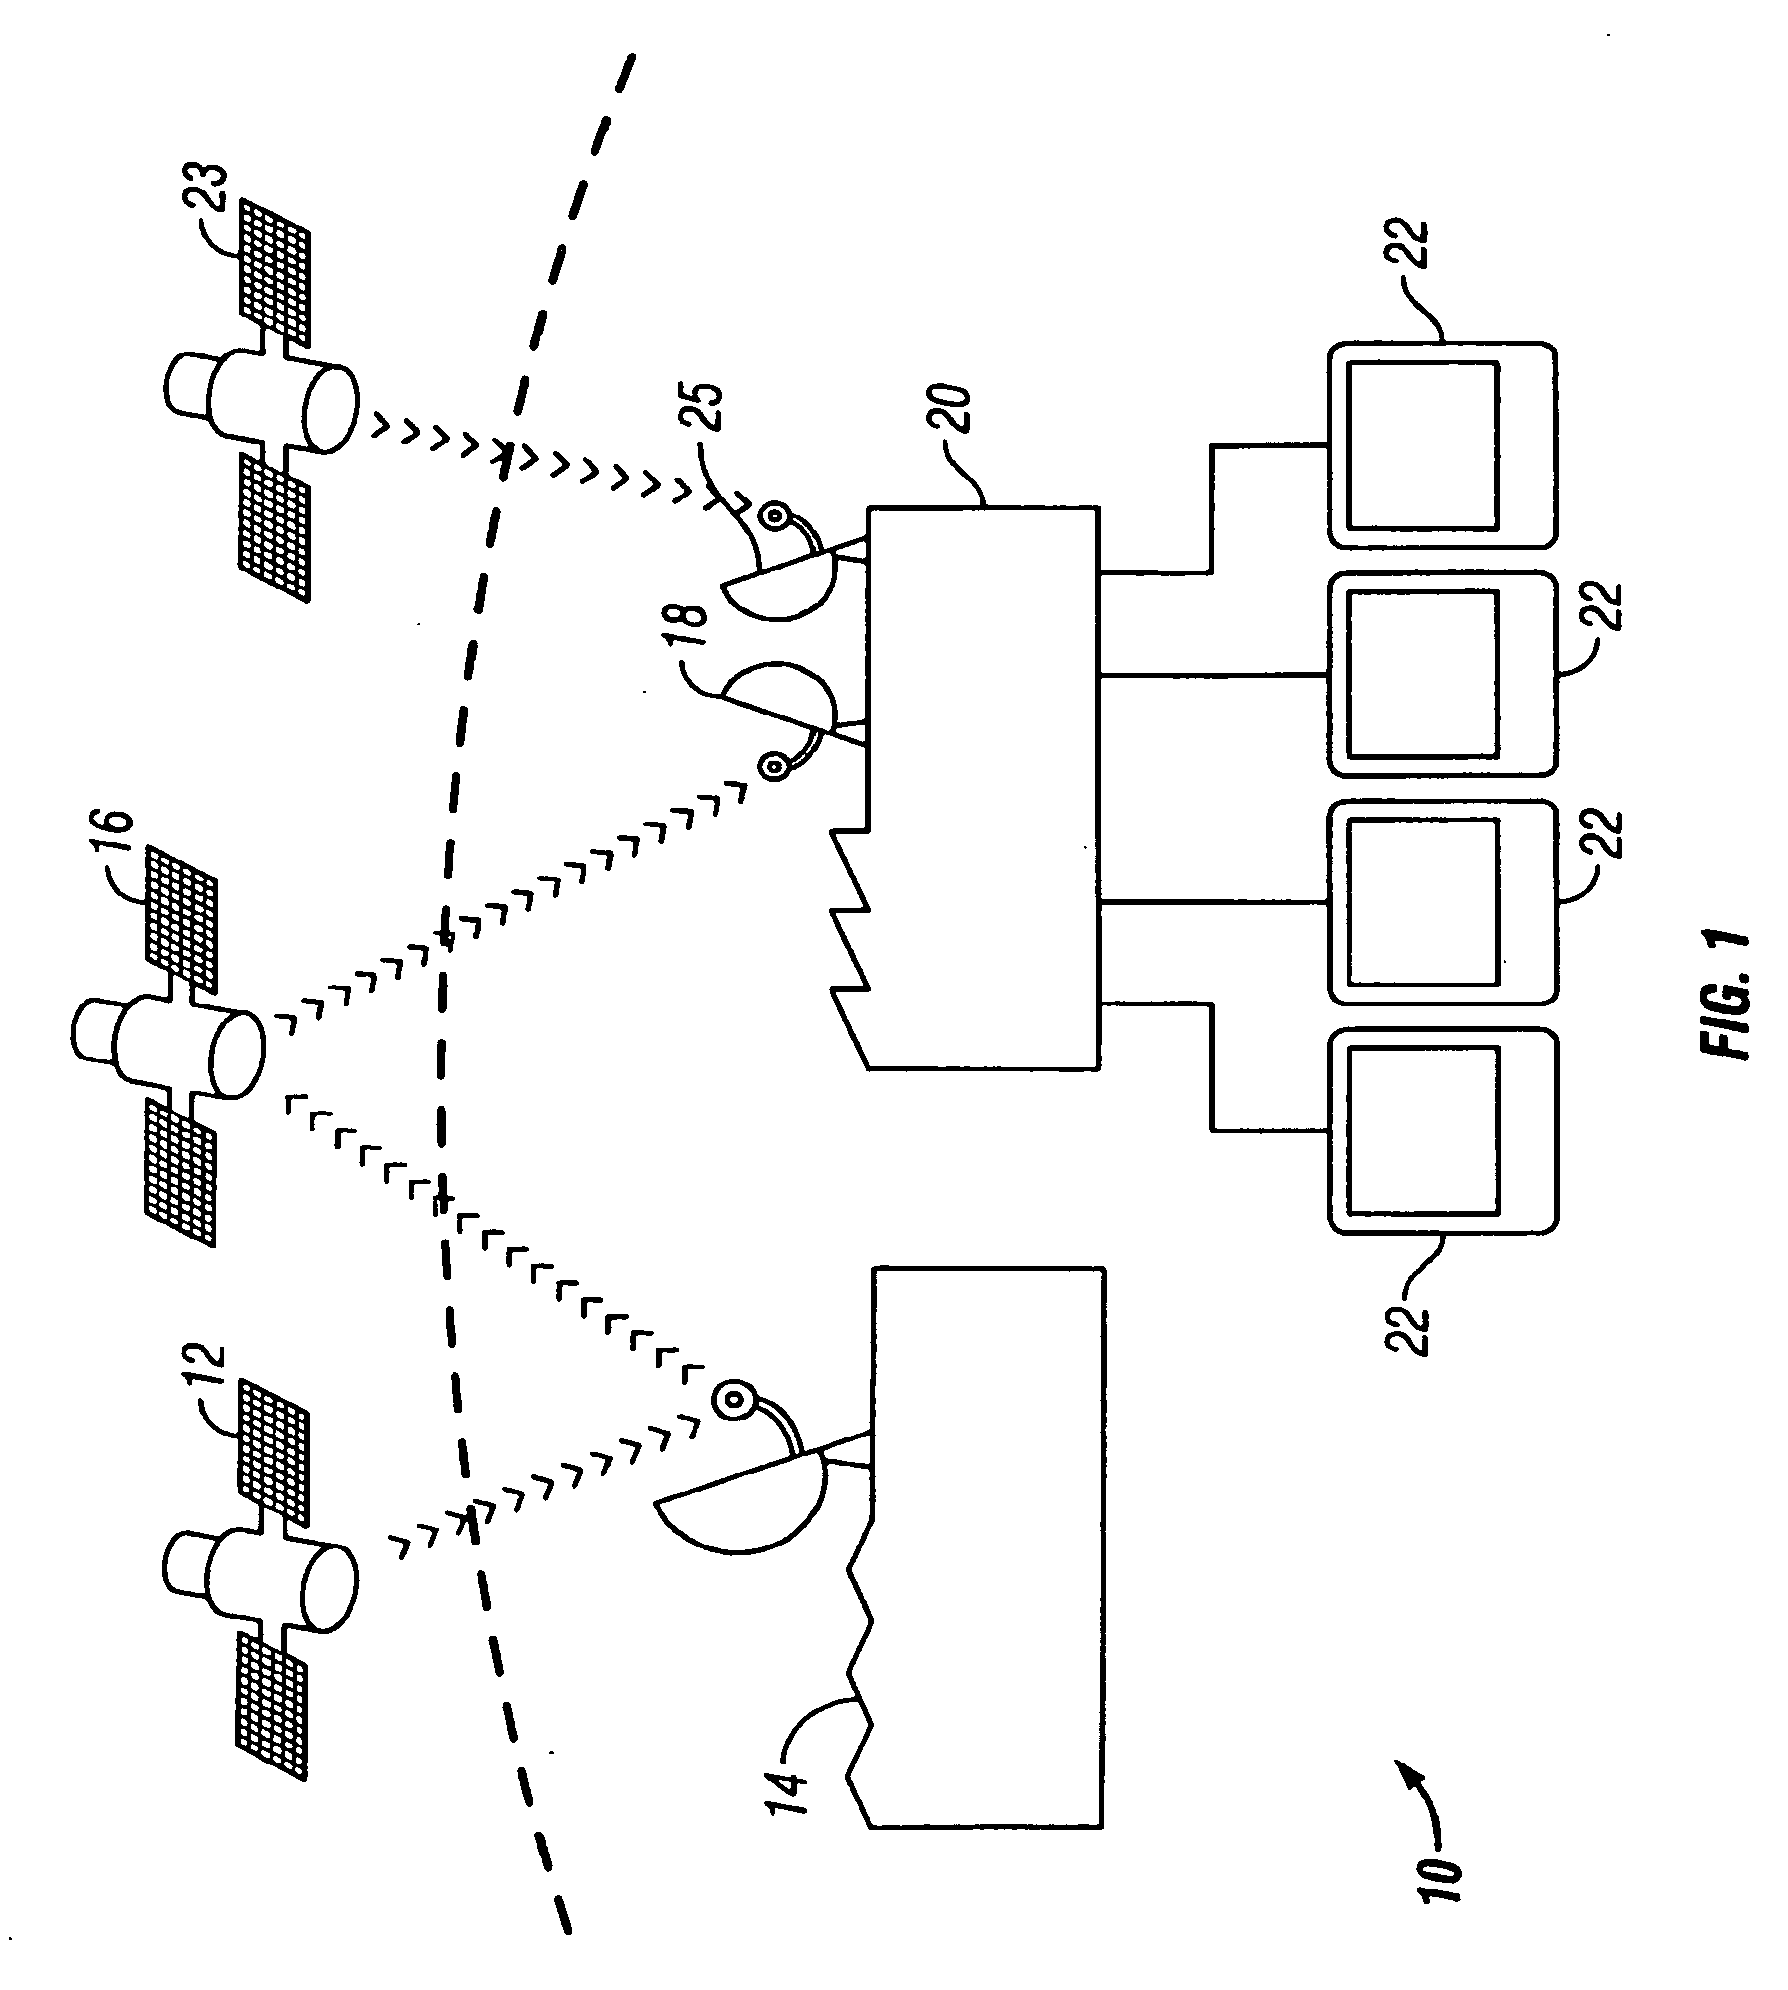 System and methods for network tv broadcasts for out-of-home viewing with targeted